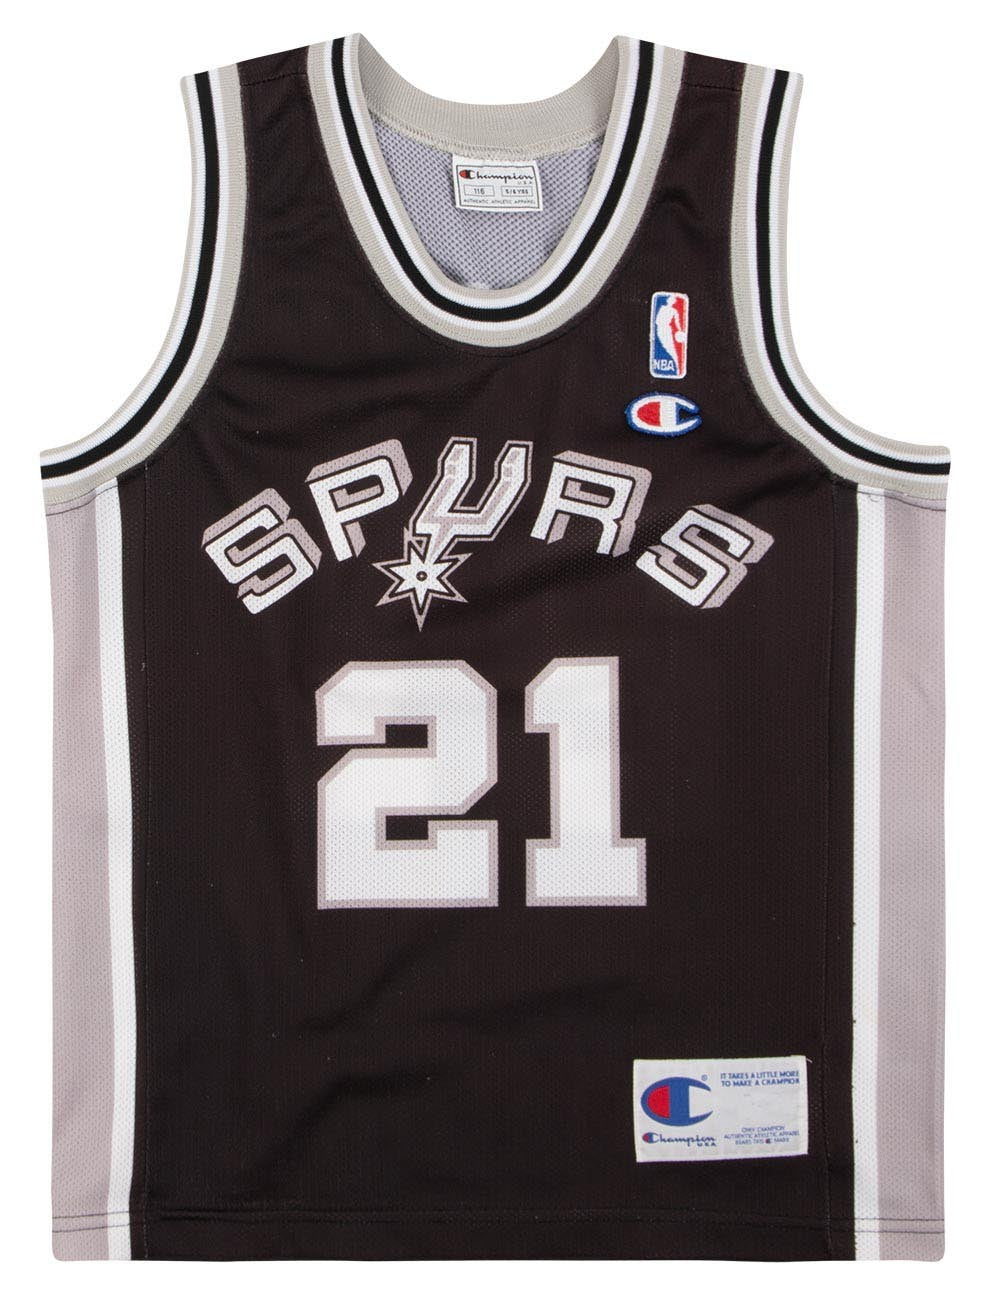 old spurs jersey